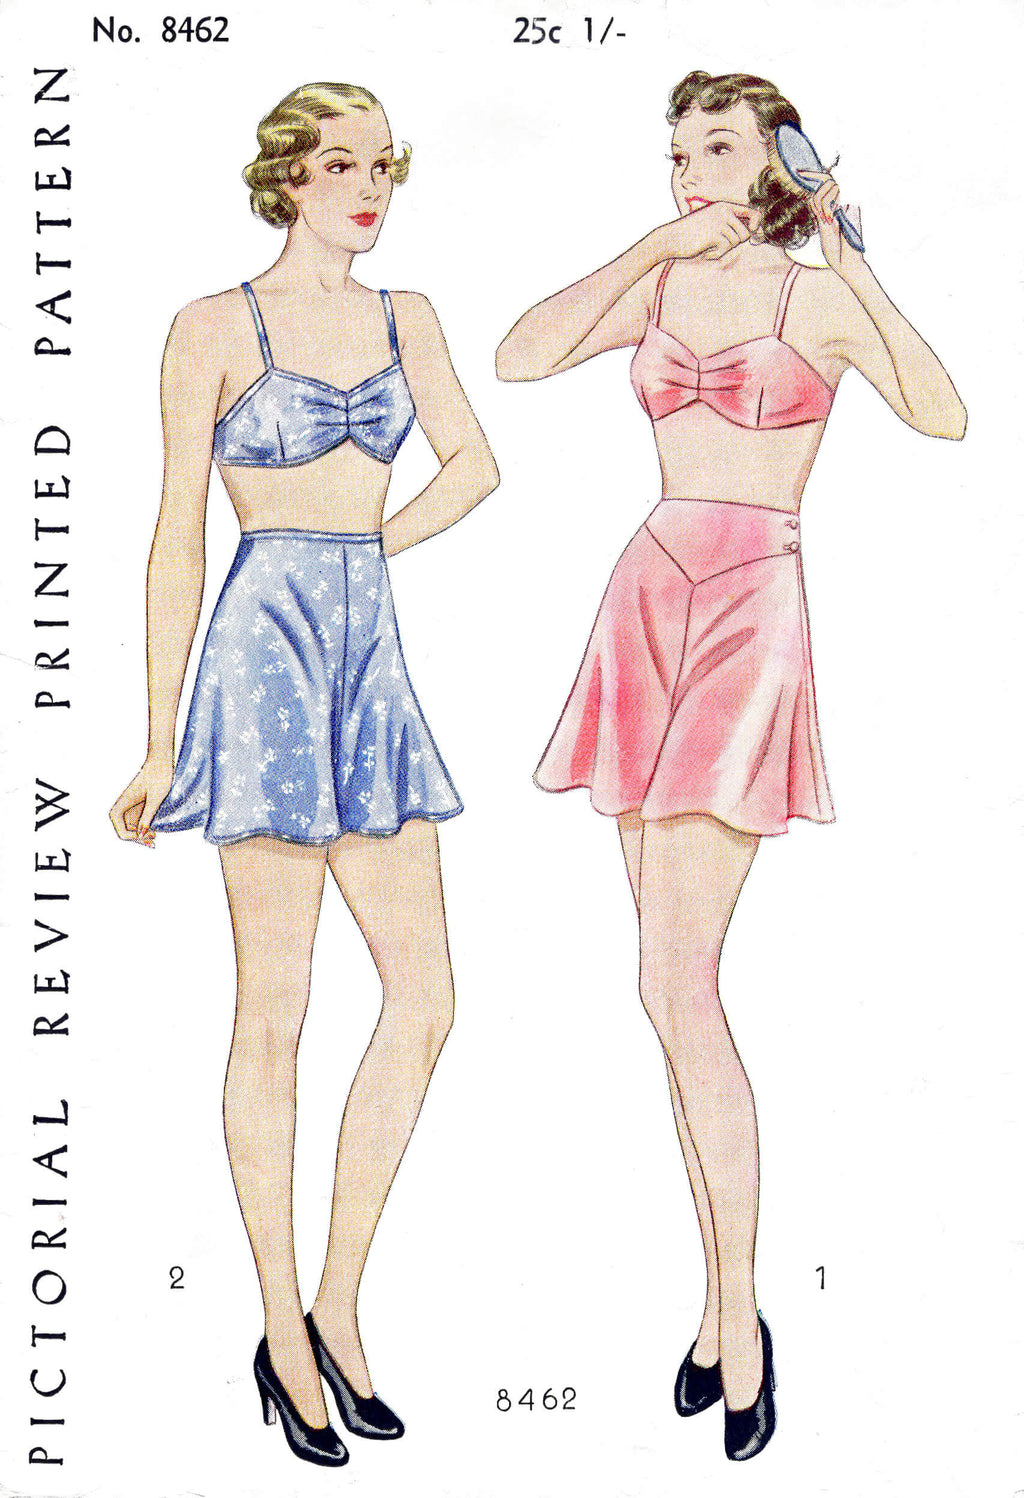 1920s 1930s Pictorial Review 8462 soft bra and tap shorts vintage lingerie sewing pattern reproduction